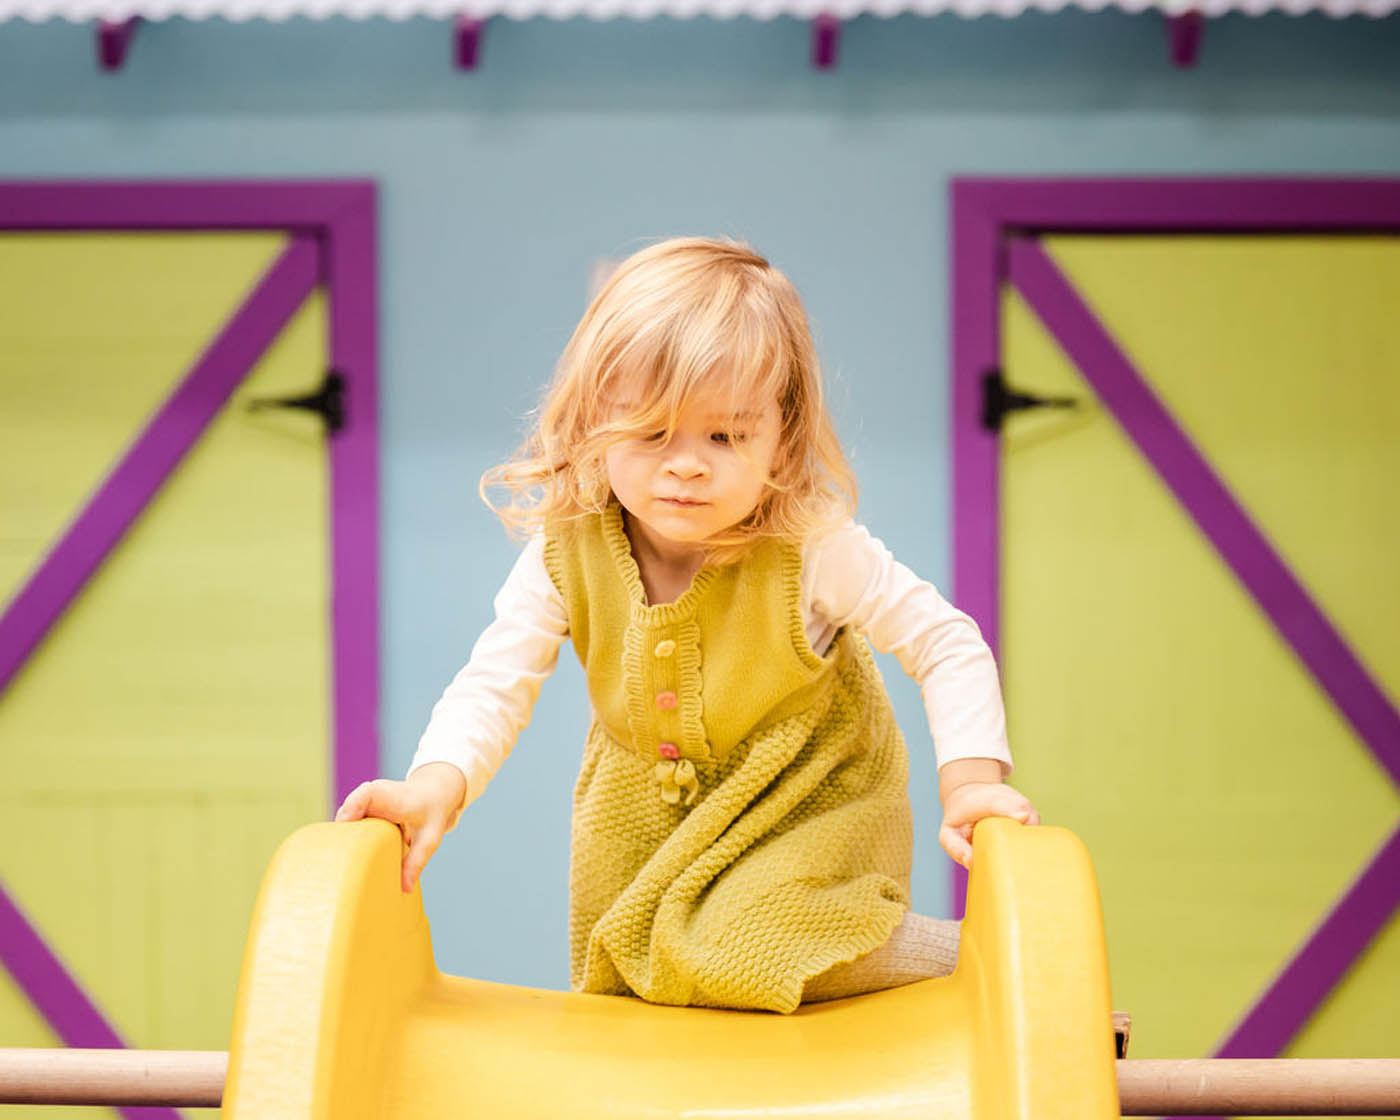 A toddler playing on a yellow slide at Romp n' Roll Wethersfield's classes for 3 year olds in Wethersfield, CT